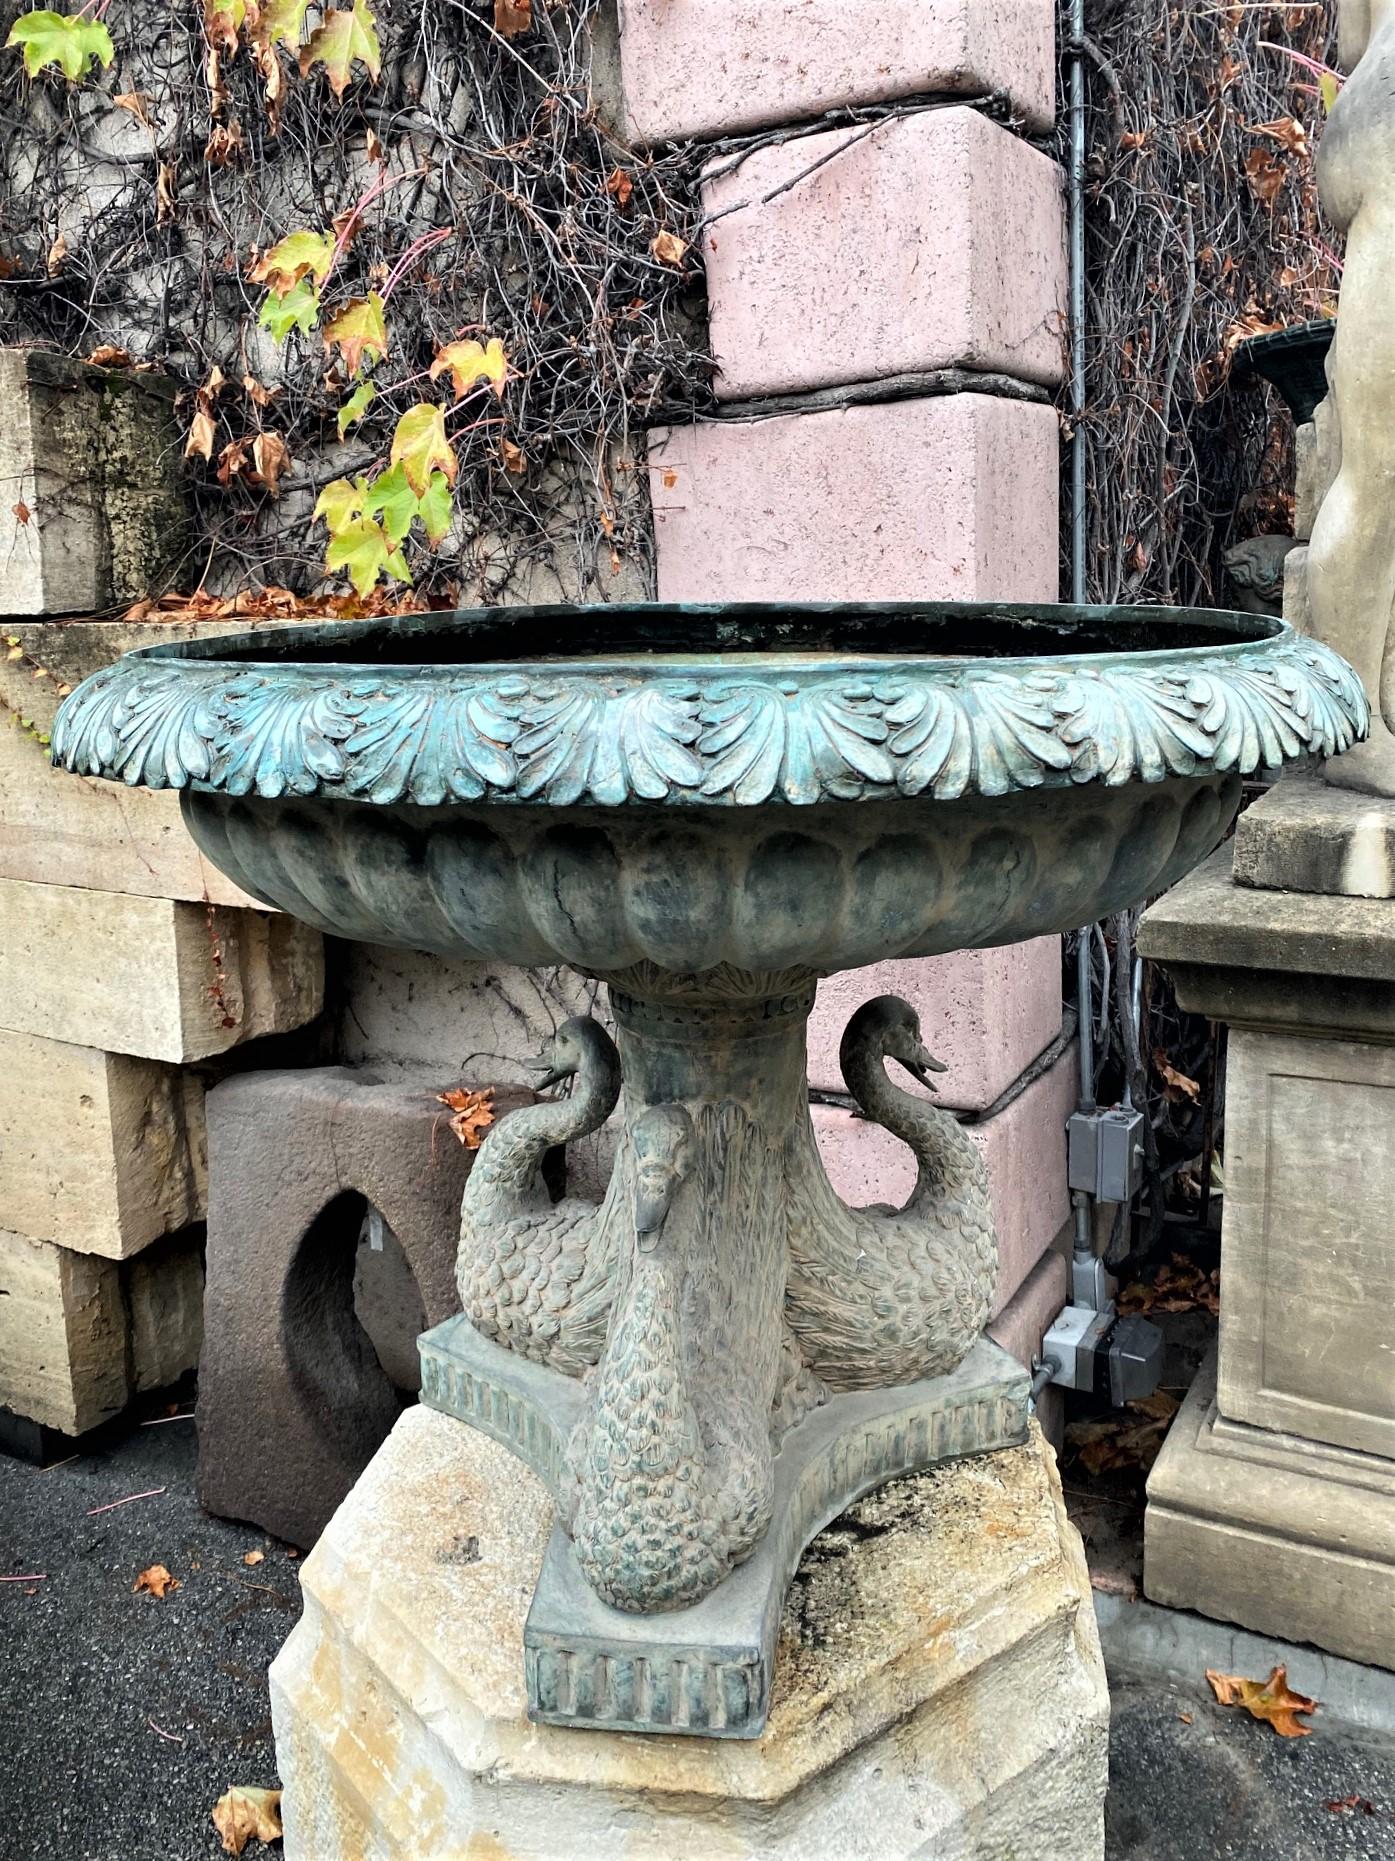 Late 19th-early 20th century very nice and detailed Hand work of late 19th century cast bronze garden water feature of 3 swans figures topped with a jardinière Urn vase shape basin. It could be used in the center of a pond or lake or basin or